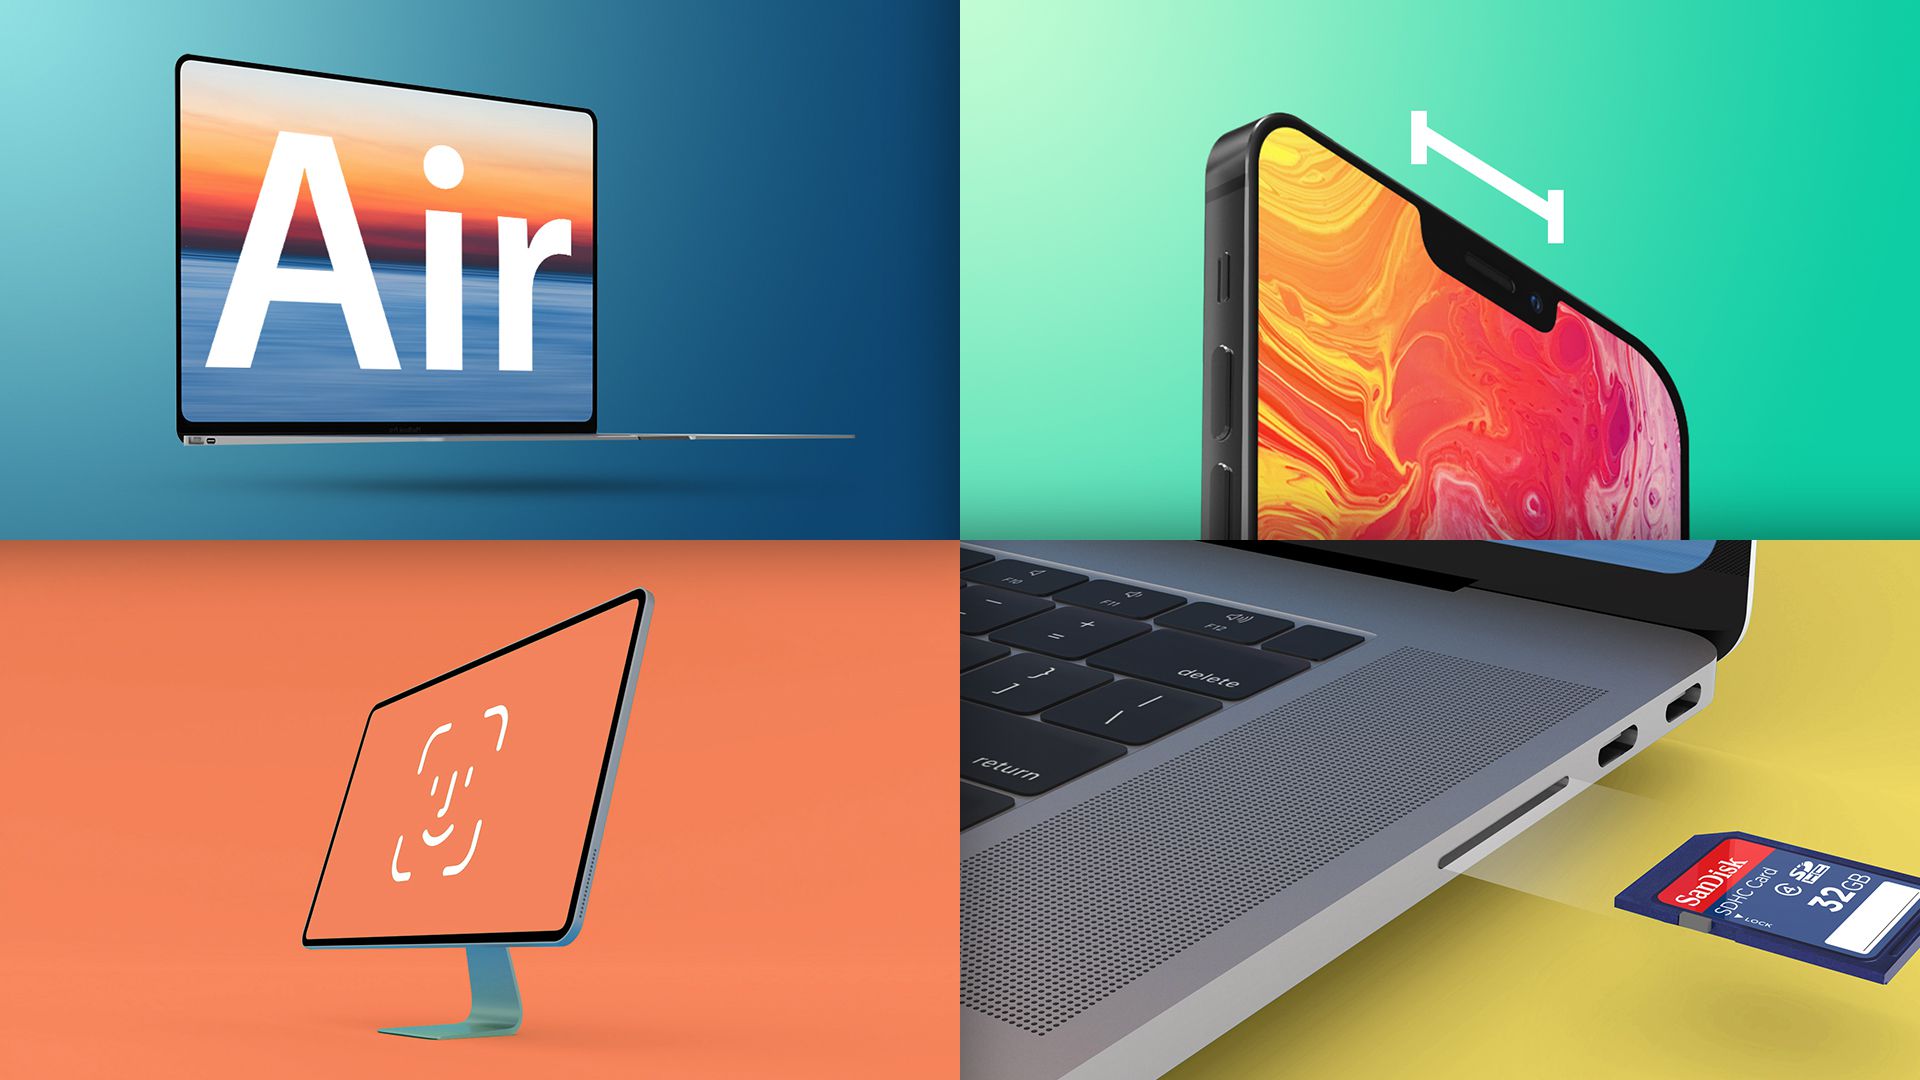 Top Stories: ‘Thinner and lighter’ MacBook Air, smaller iPhone 13 notch, iOS 14.4 incoming